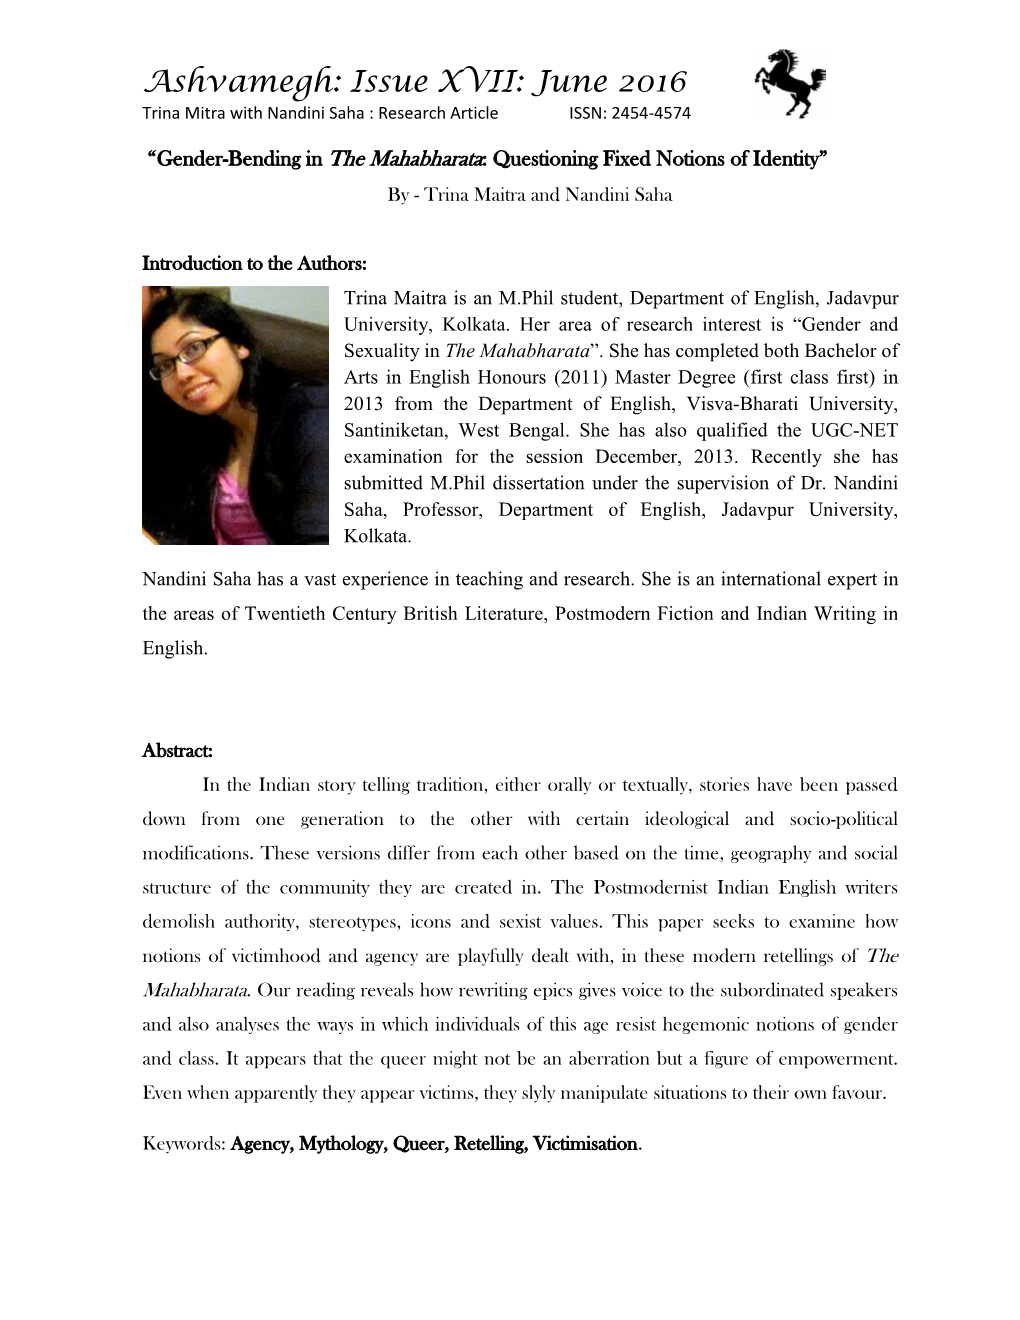 Issue XVII: June 2016 Trina Mitra with Nandini Saha : Research Article ISSN: 2454-4574